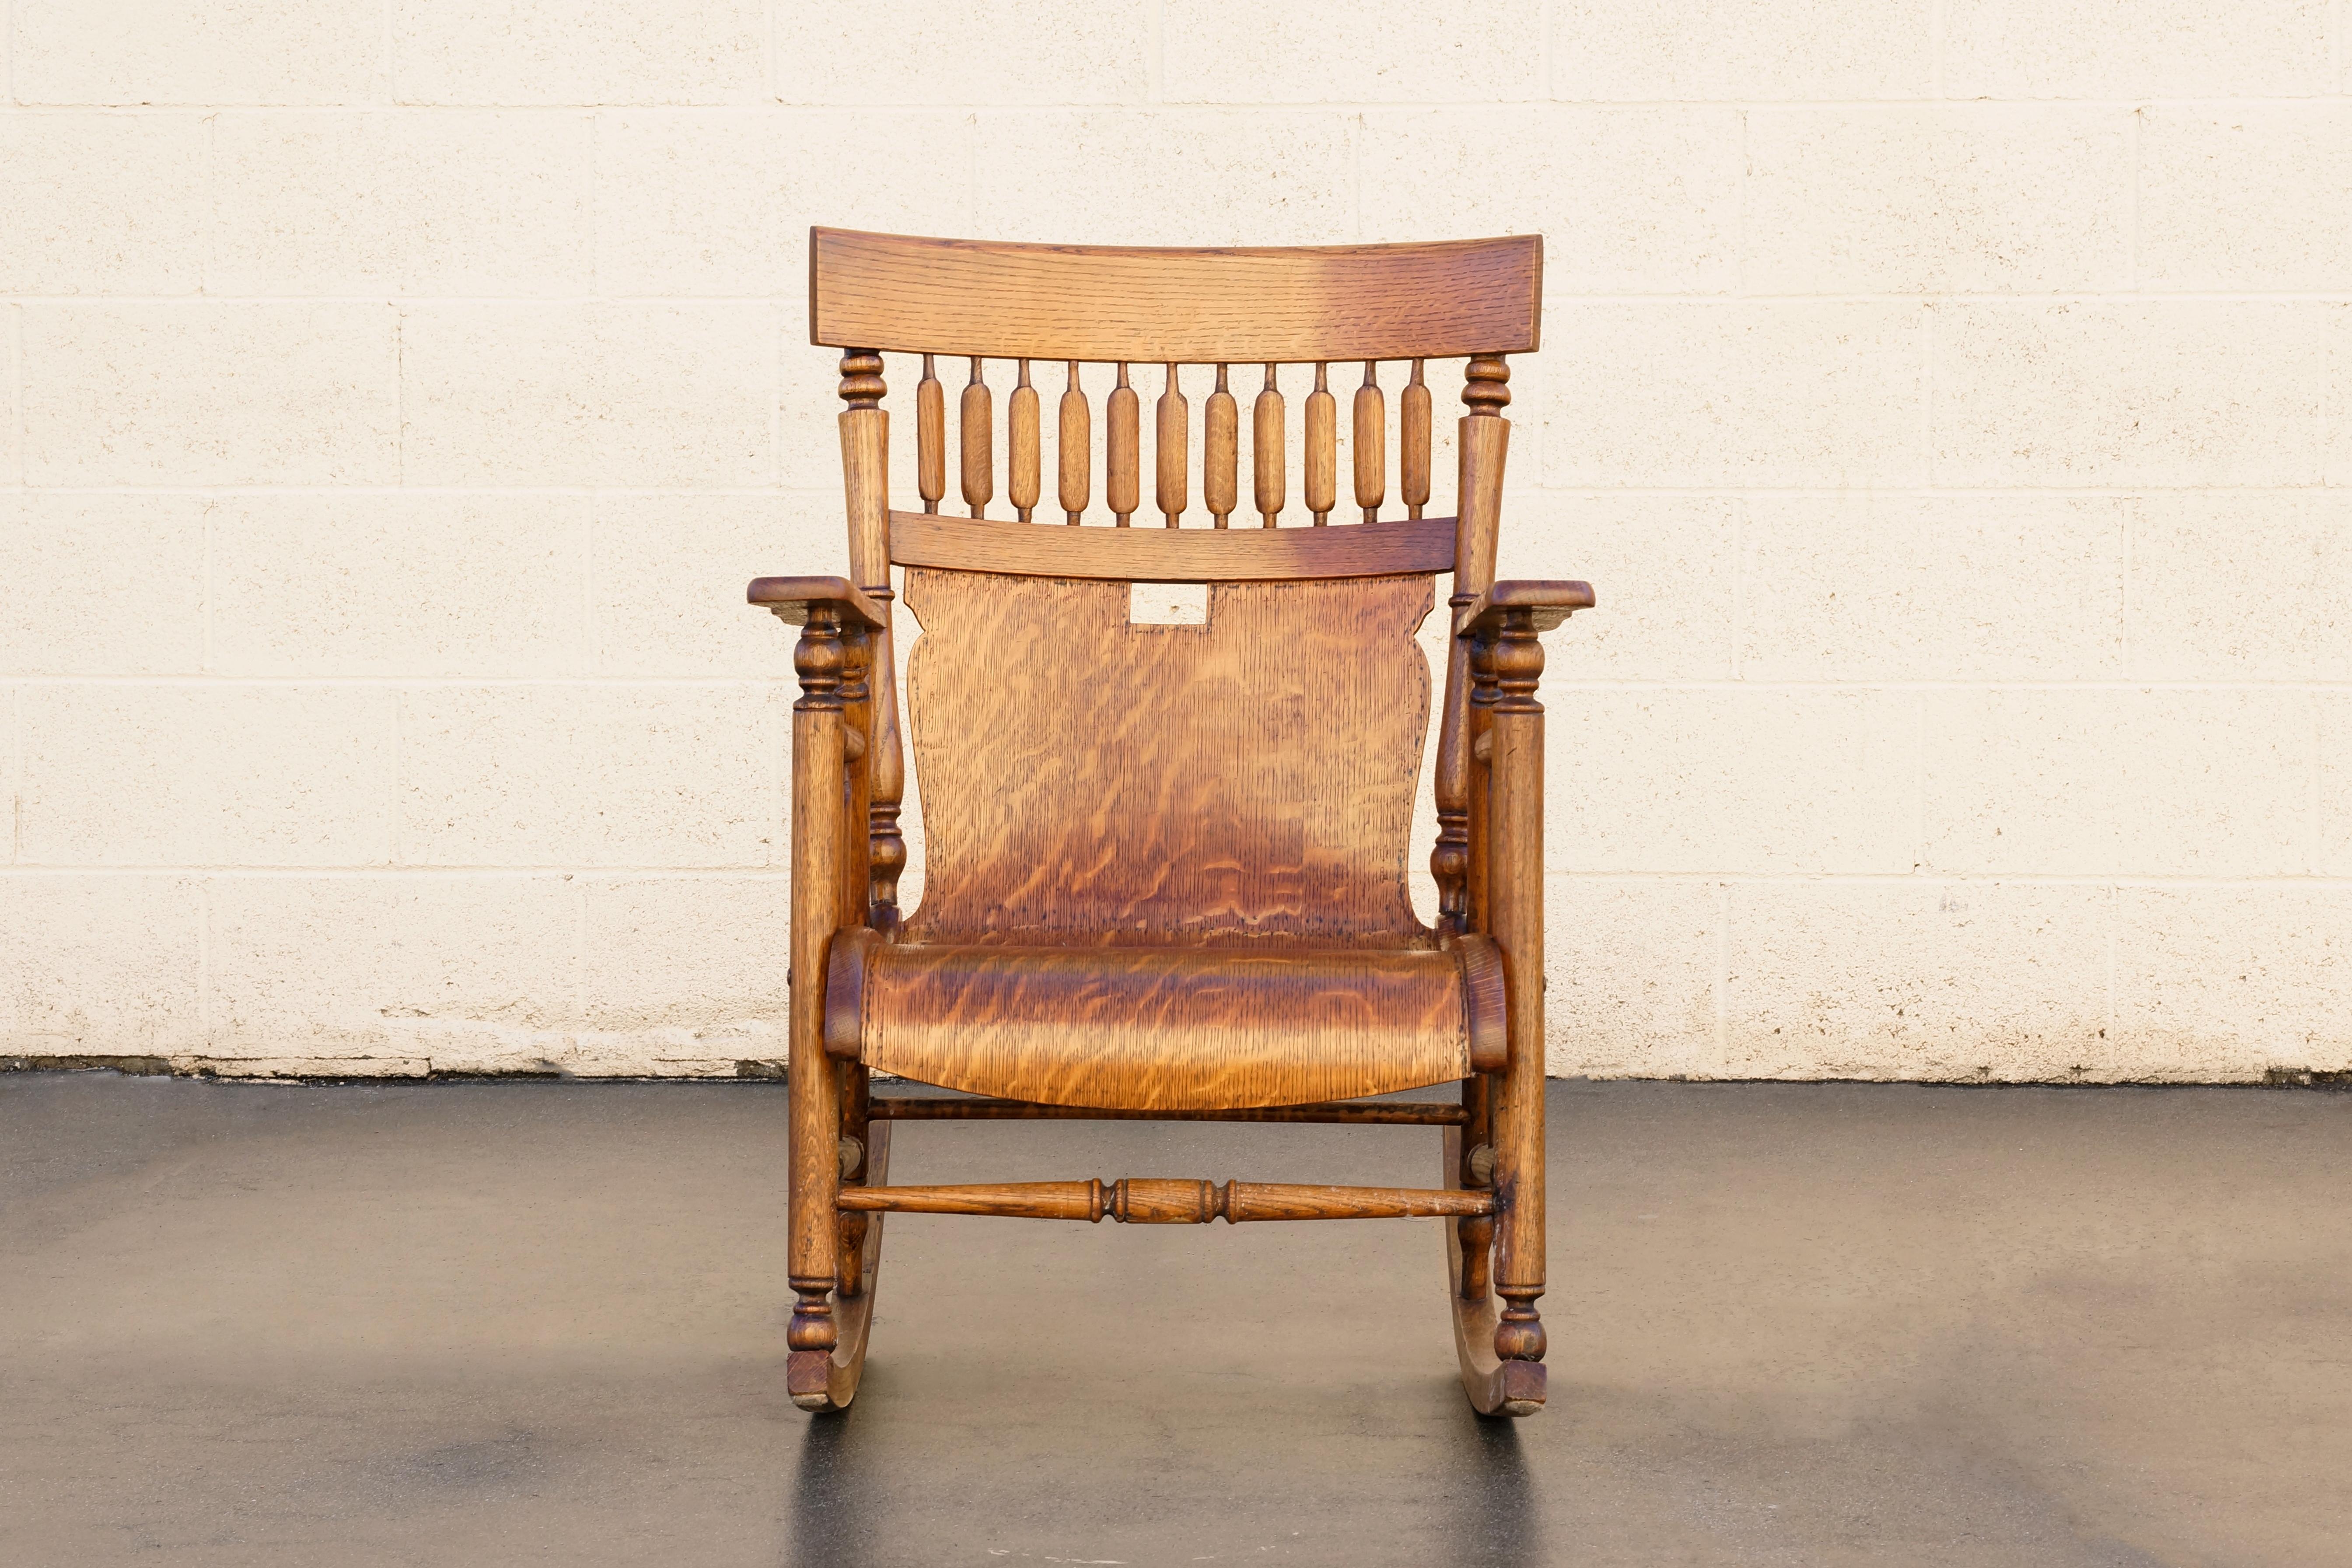 Remarkable rocking chair of the Craftsman/ Windsor style. Composed of oak with short arrow back spindles and solid bentwood seat. Outstanding grain, color and patina, lightly reconditioned to bring out its natural glow. In excellent antique